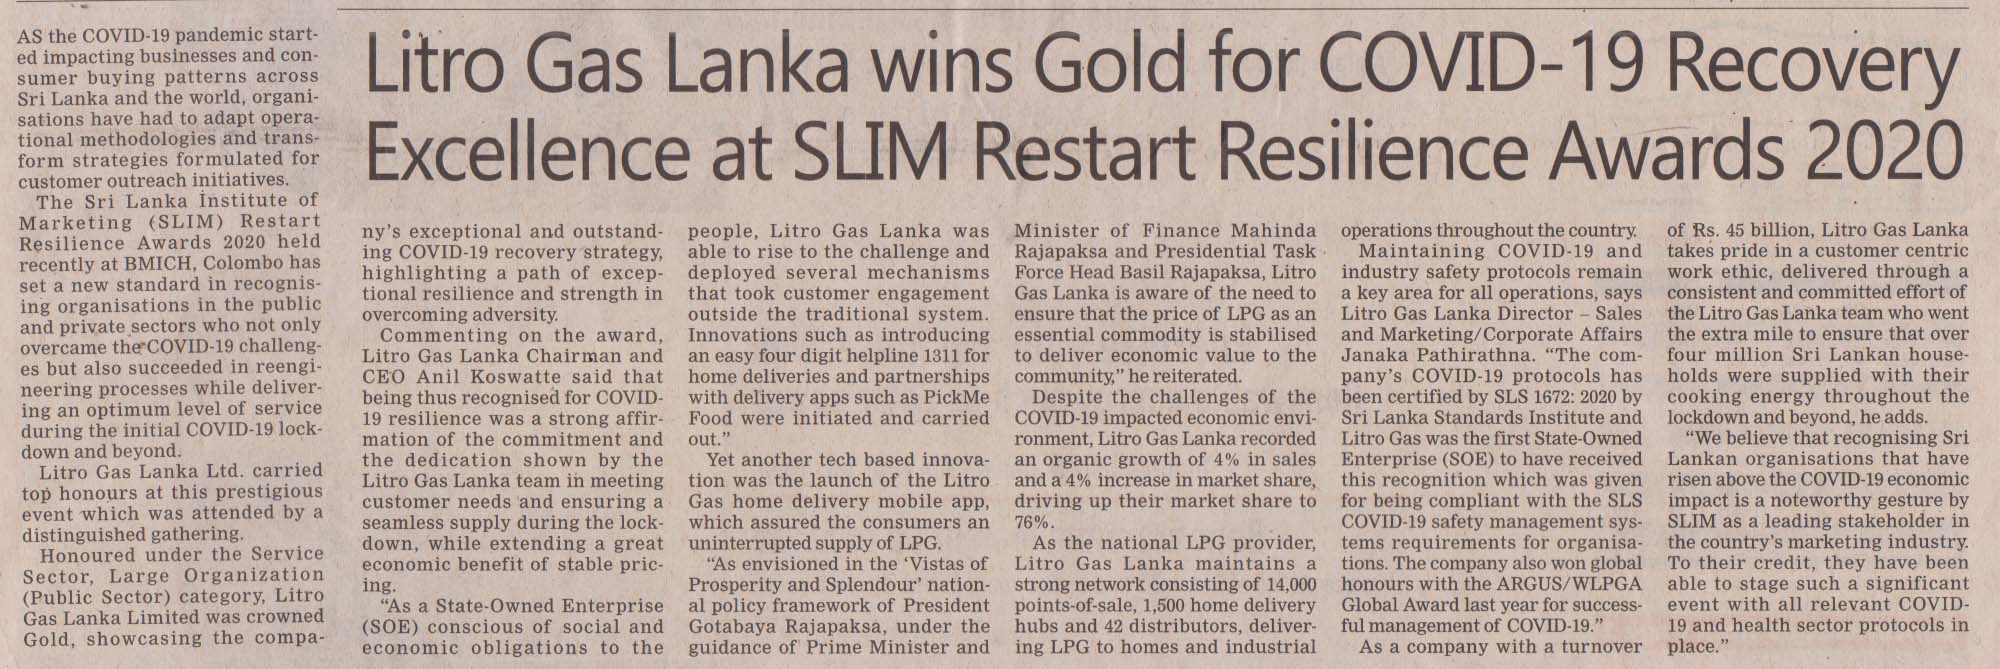 Litro Gas Lanka winds Gold for COVID-19 Recovery Excellence at SLIM Restart Resilience Awards 2020